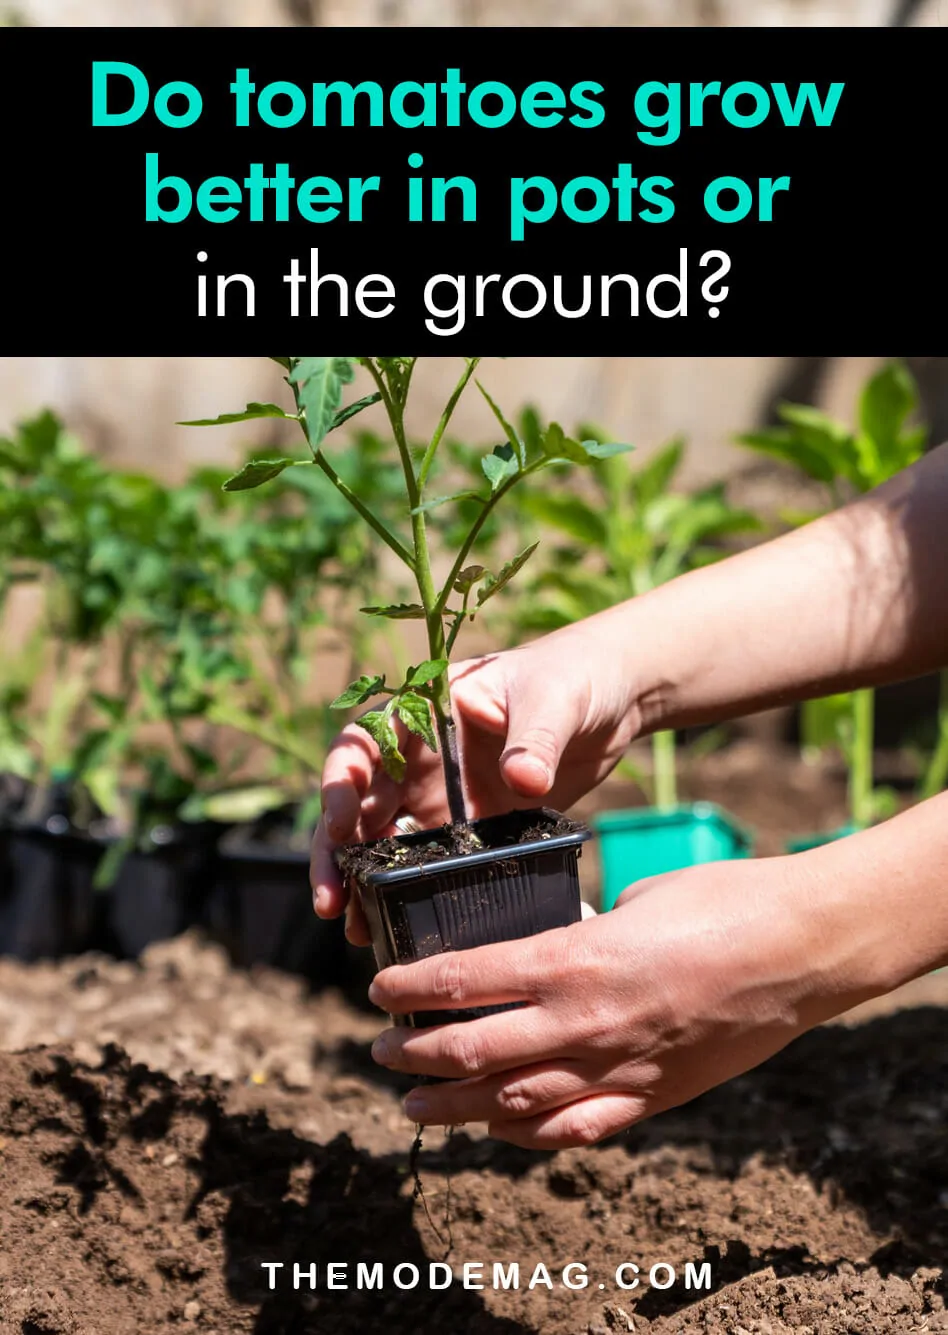 Do tomatoes grow better in pots or in the ground?